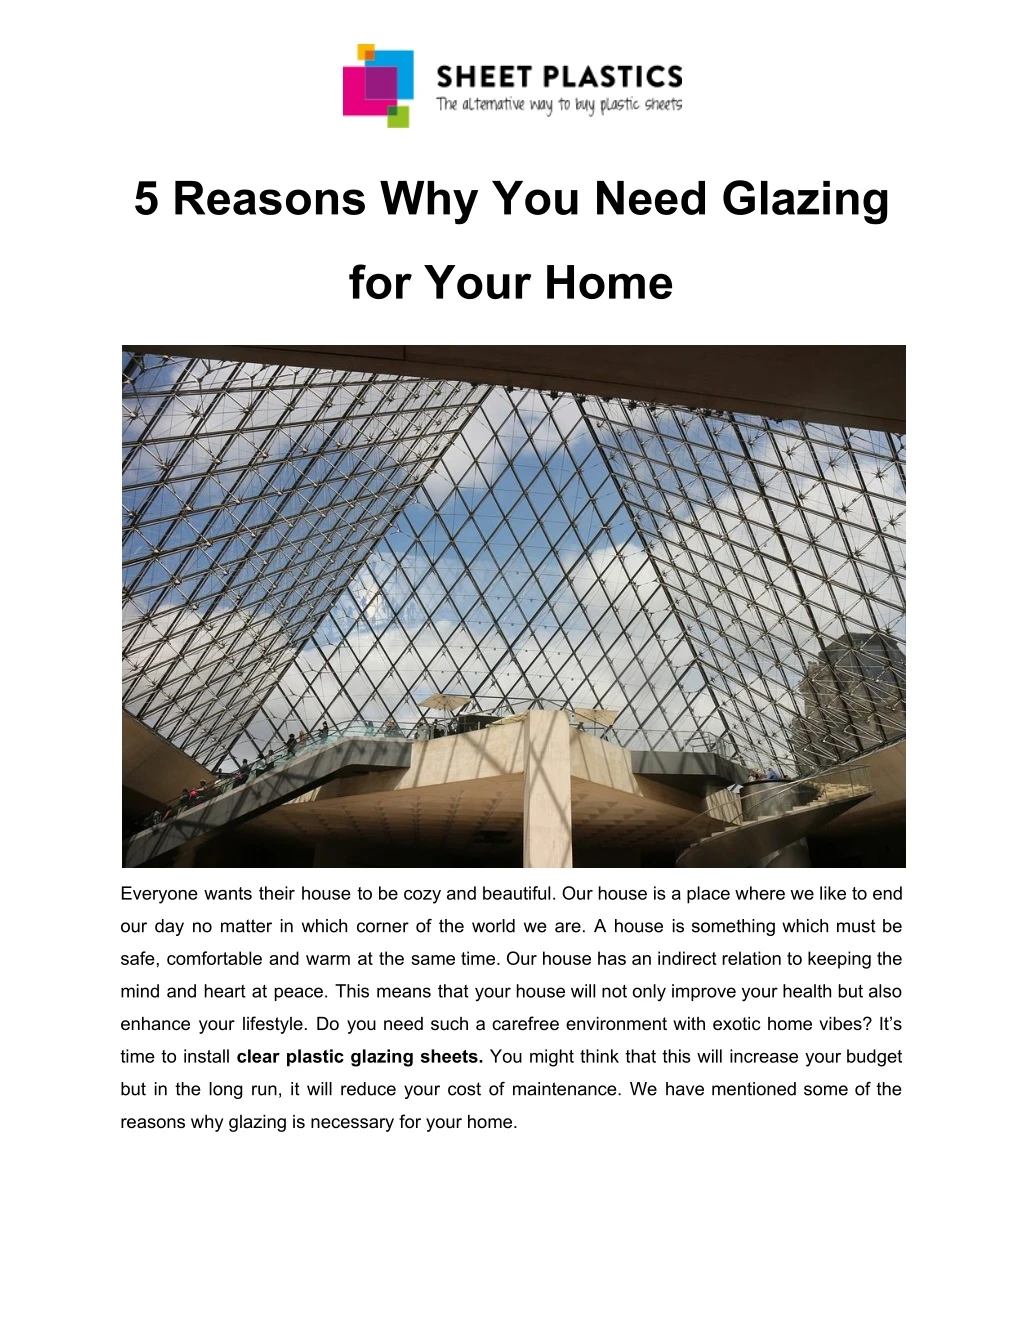 5 reasons why you need glazing